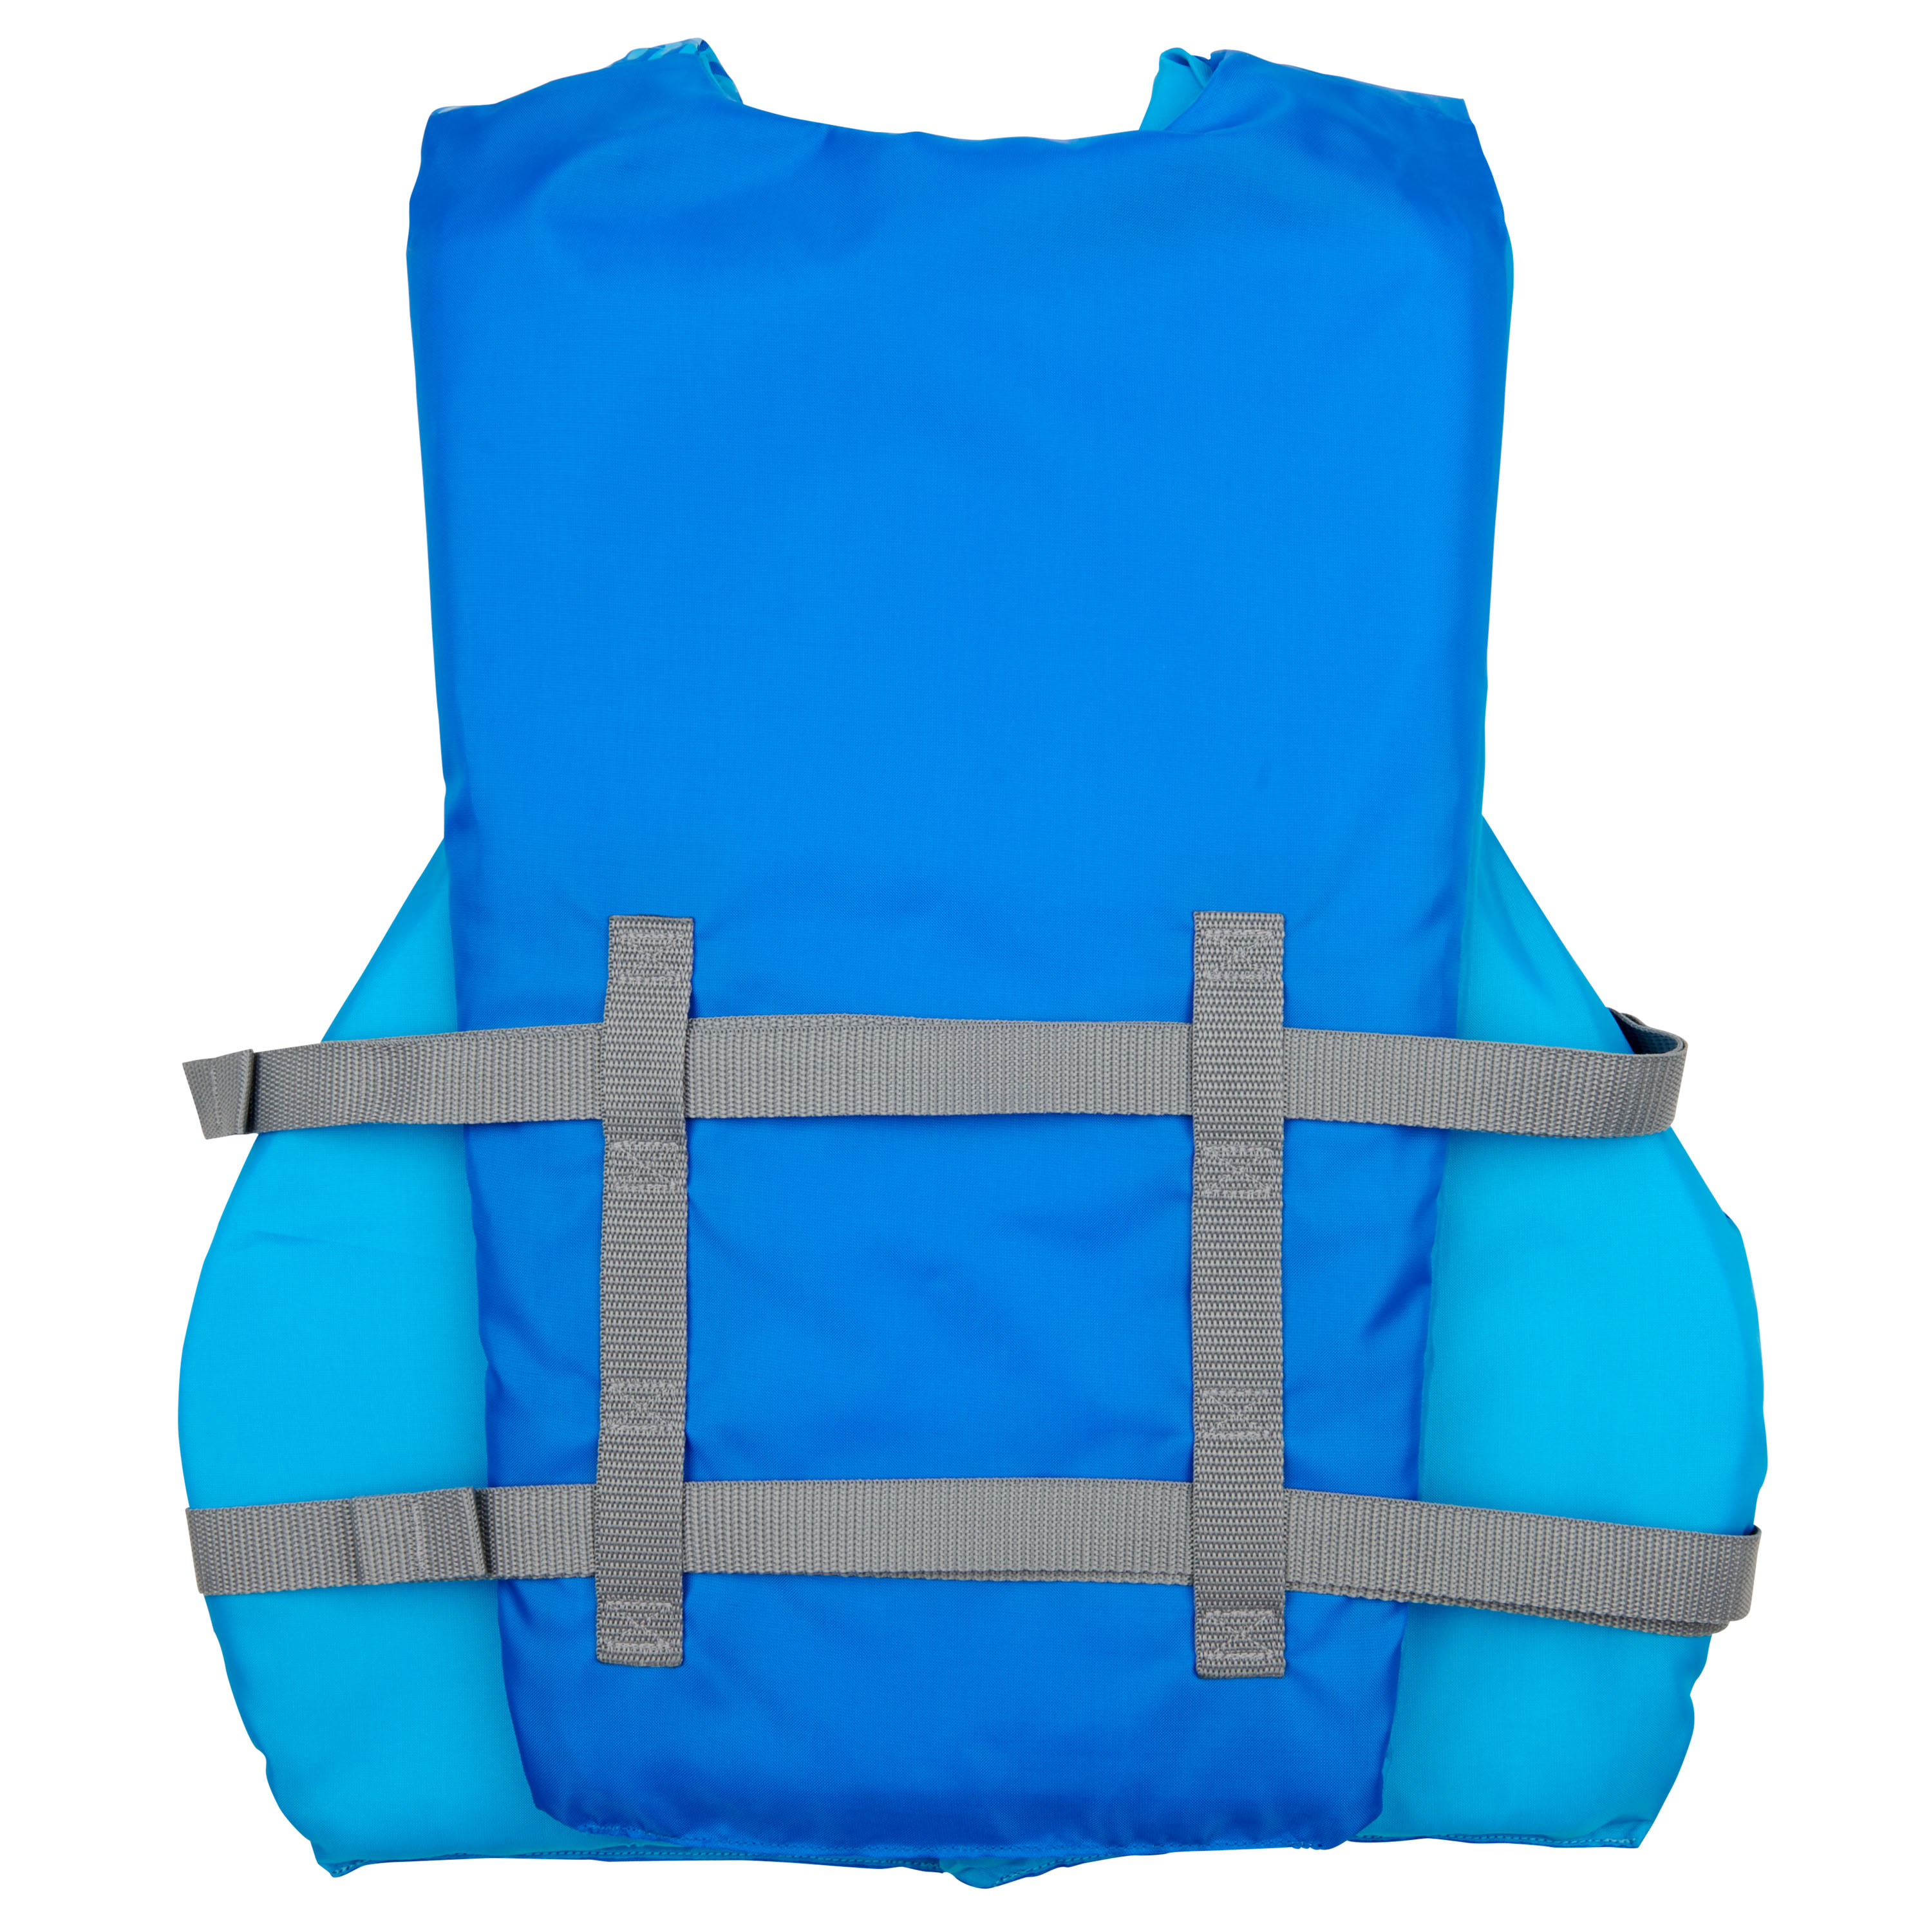 X2O Universal Adult 2X/3X Life Vest and Jacket, (50" - 60" Chest), Blue Ocean Coral - image 5 of 11